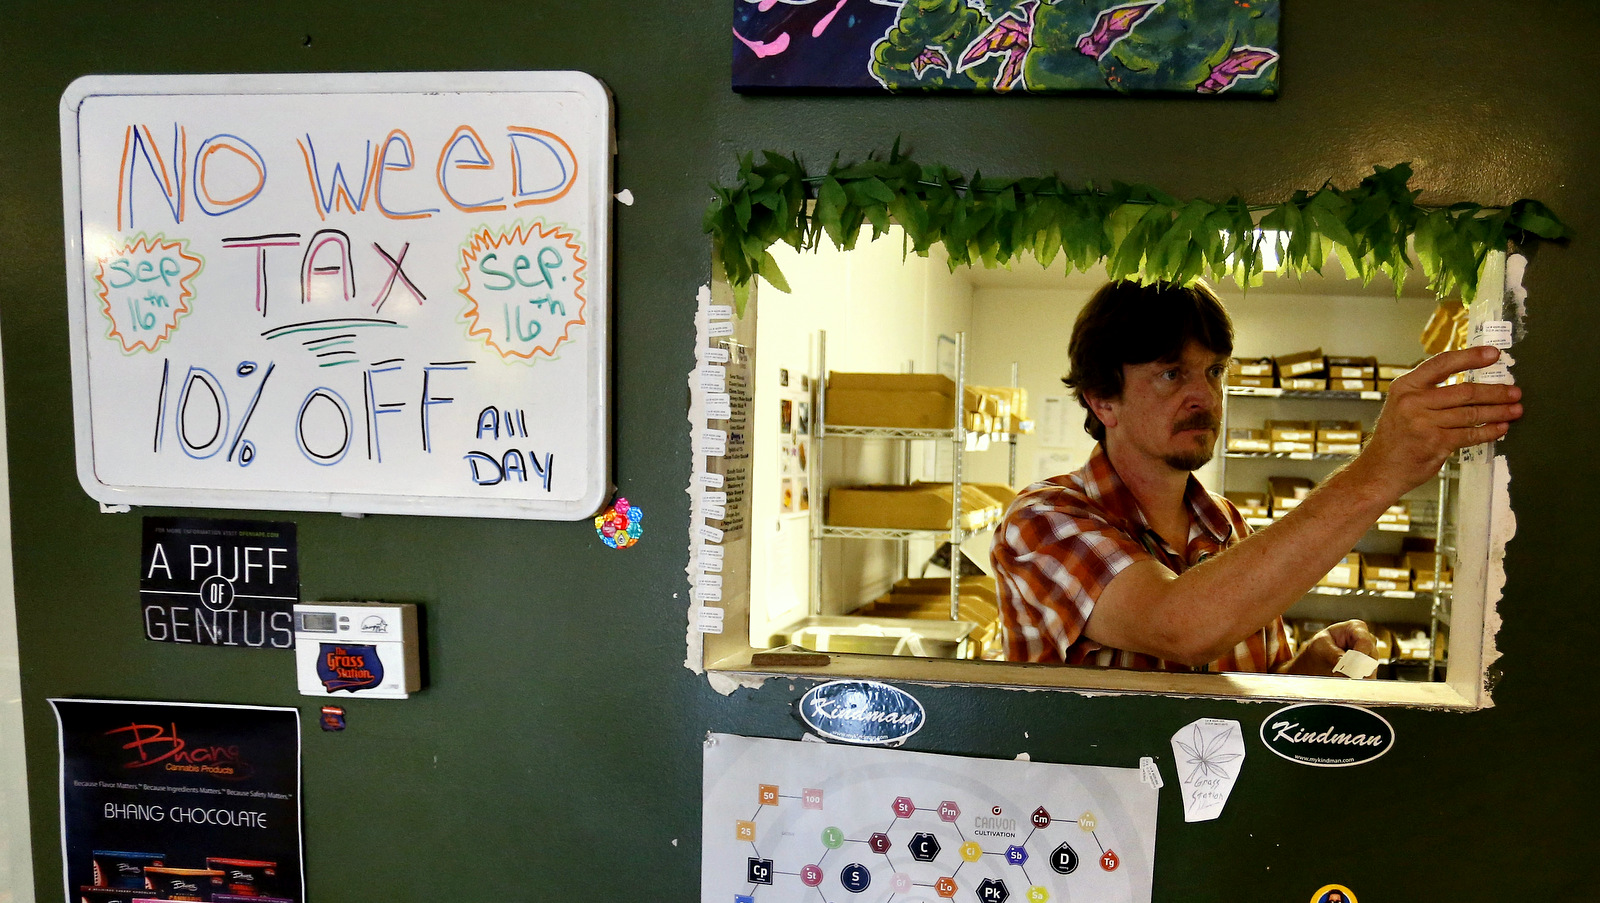 Inventory specialist David Shepard prepares date-of-purchase stickers that are required by law on all items sold, on a day in which no pot taxes were collected statewide, inside The Grass Station recreational marijuana store, in Denver, Colo. (AP Photo/Brennan Linsley, File)